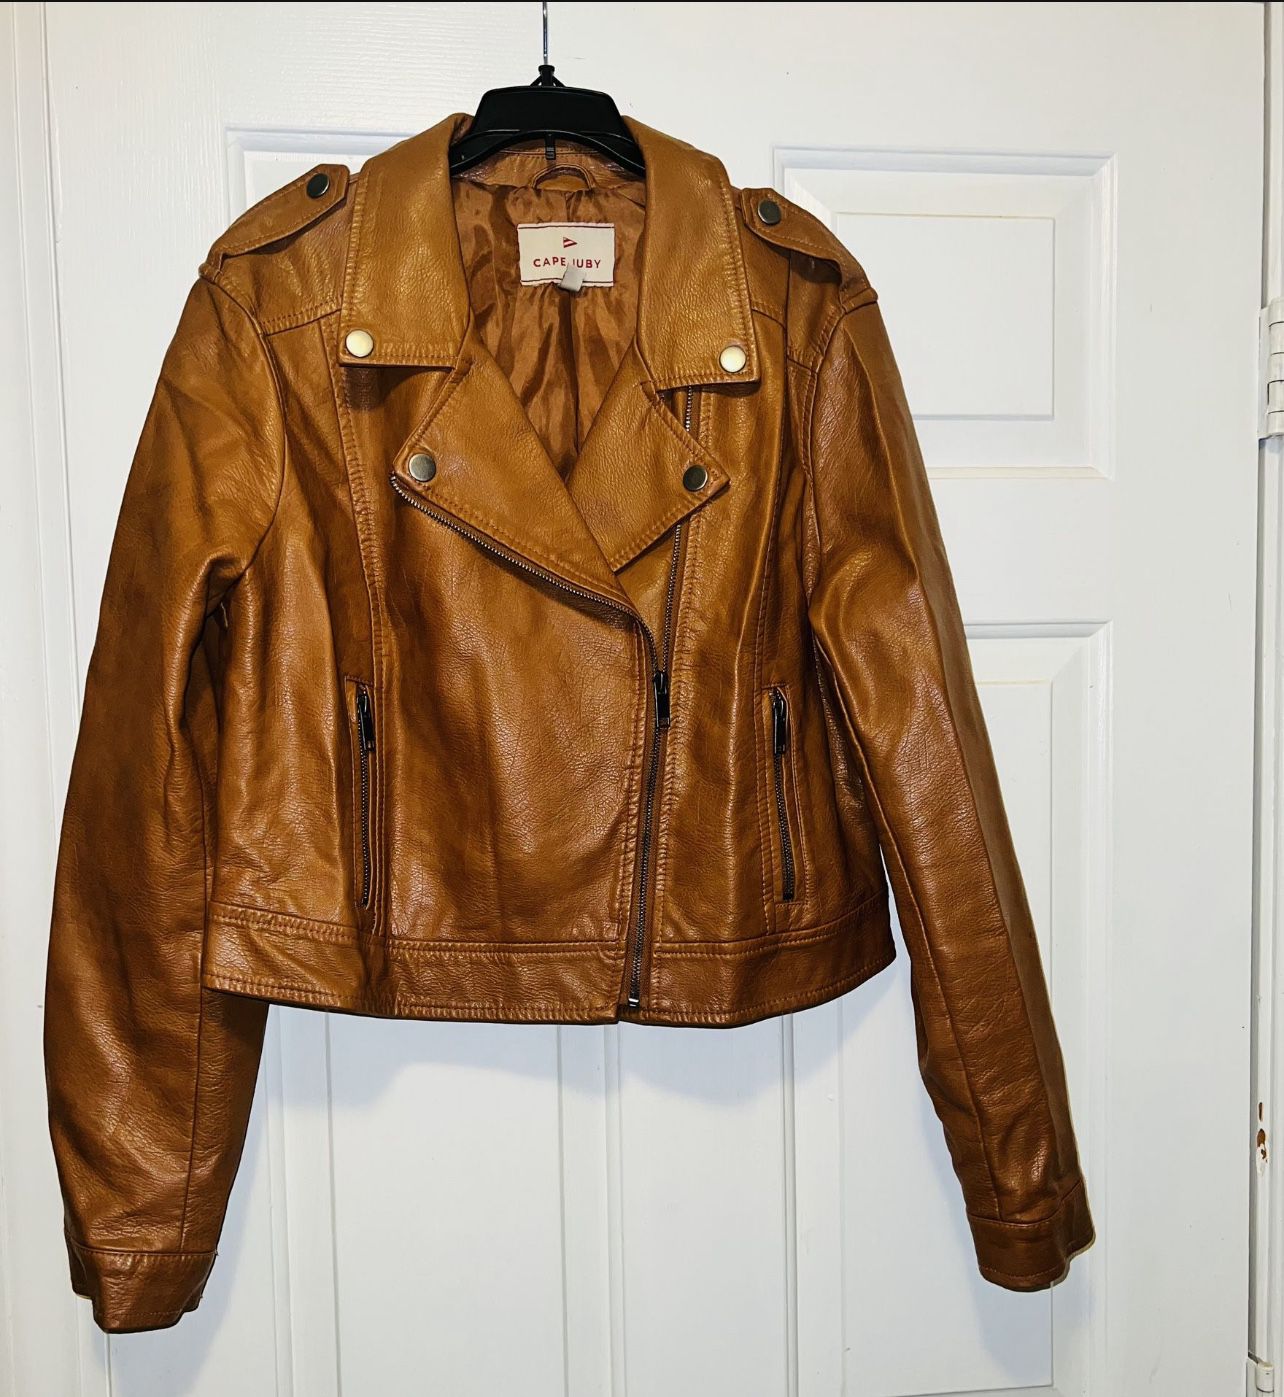 CAPE  JUBY LEATHER JACKET (XL TG) LIKE NEW ONLY $30